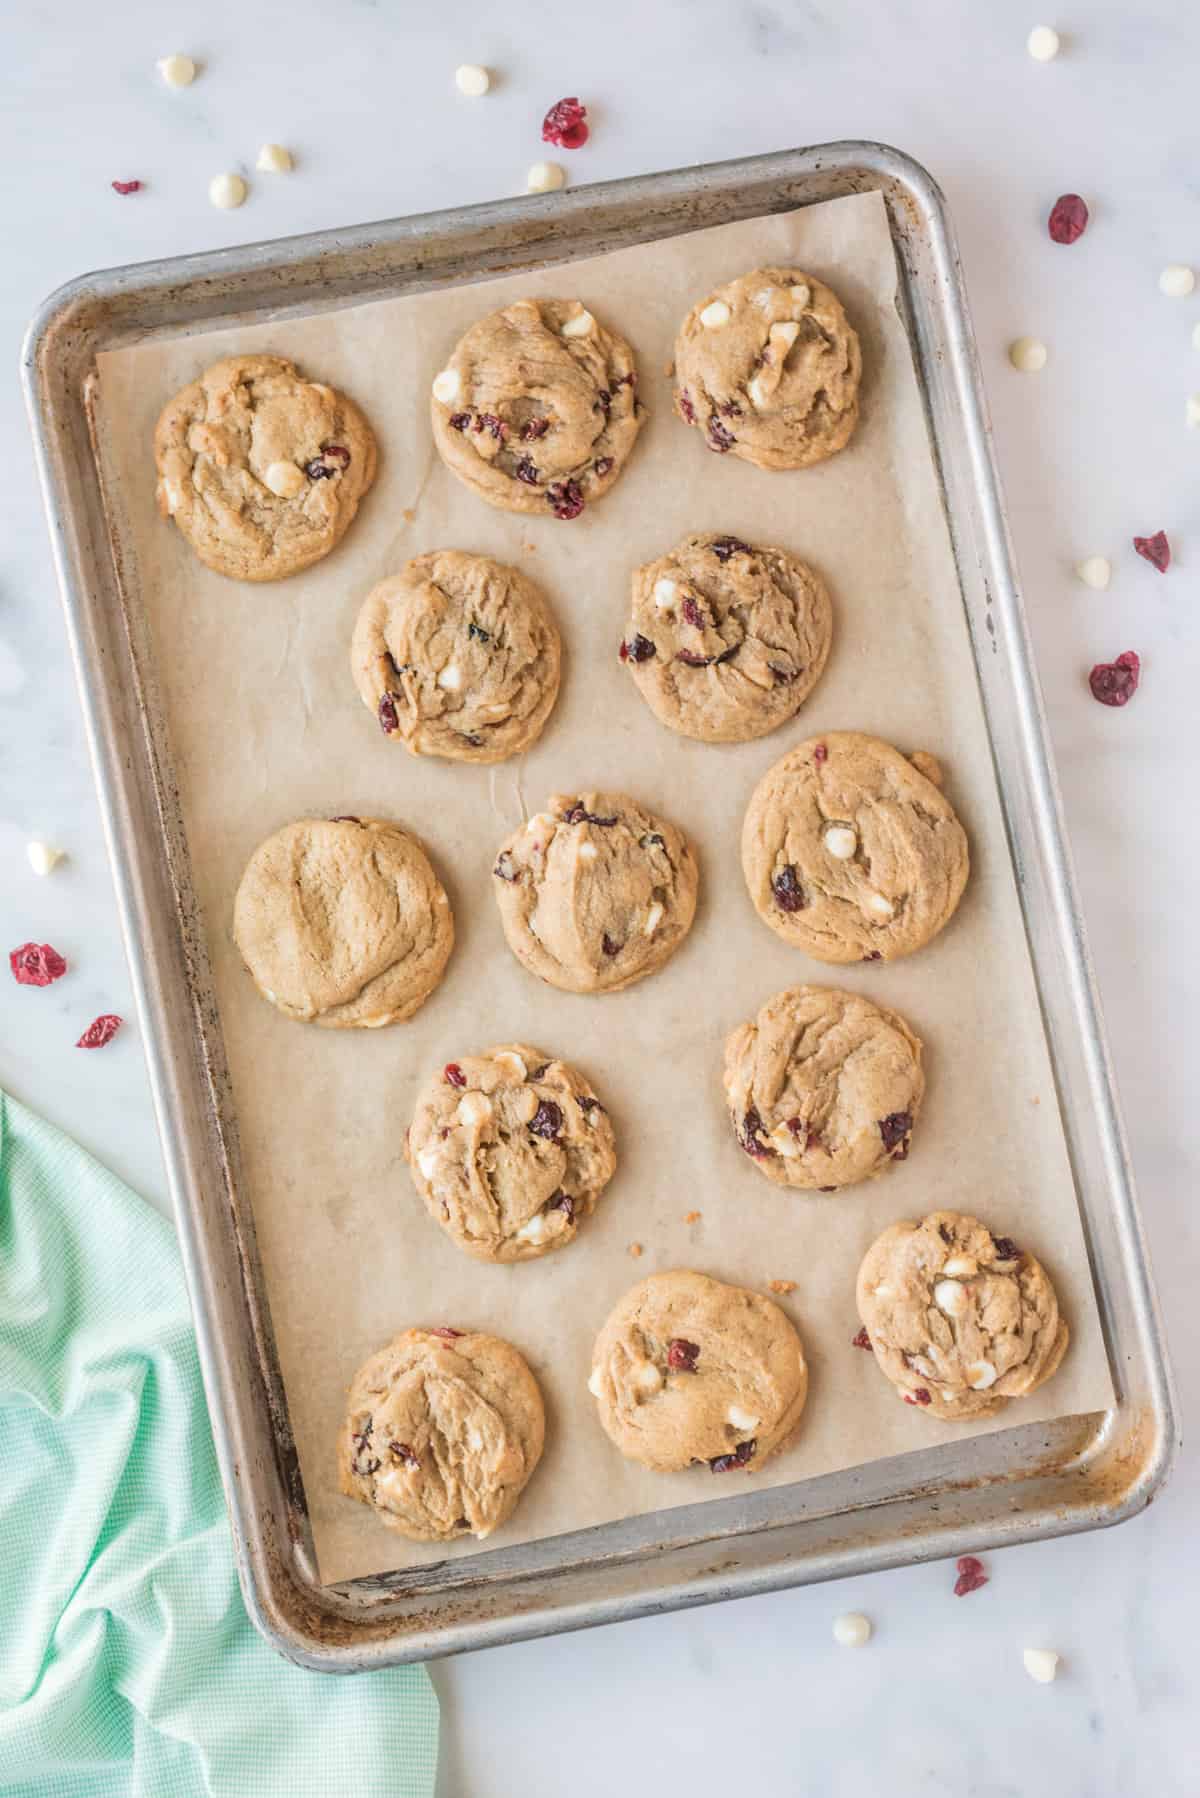 Baked White Chocolate Cranberry Cookies on baking sheet